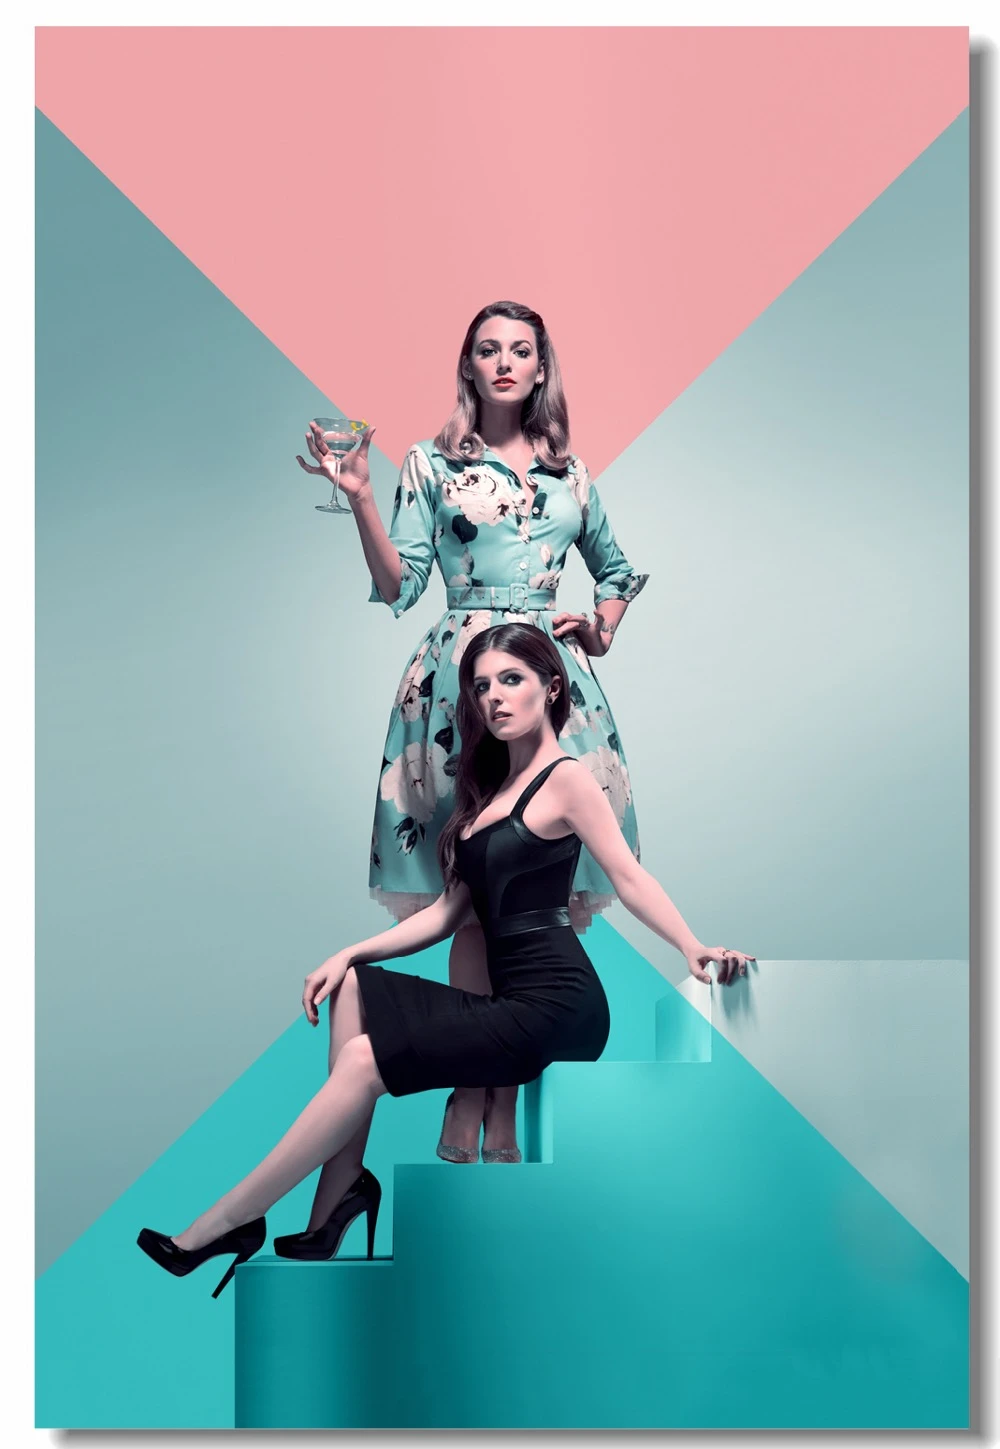 Custom Printing Wall Arts A Simple Favor Poster Anna Kendrick Movie Wall  Sticker Blake Lively Wallpaper Living Room Decor #0868# - Wall Stickers -  AliExpress